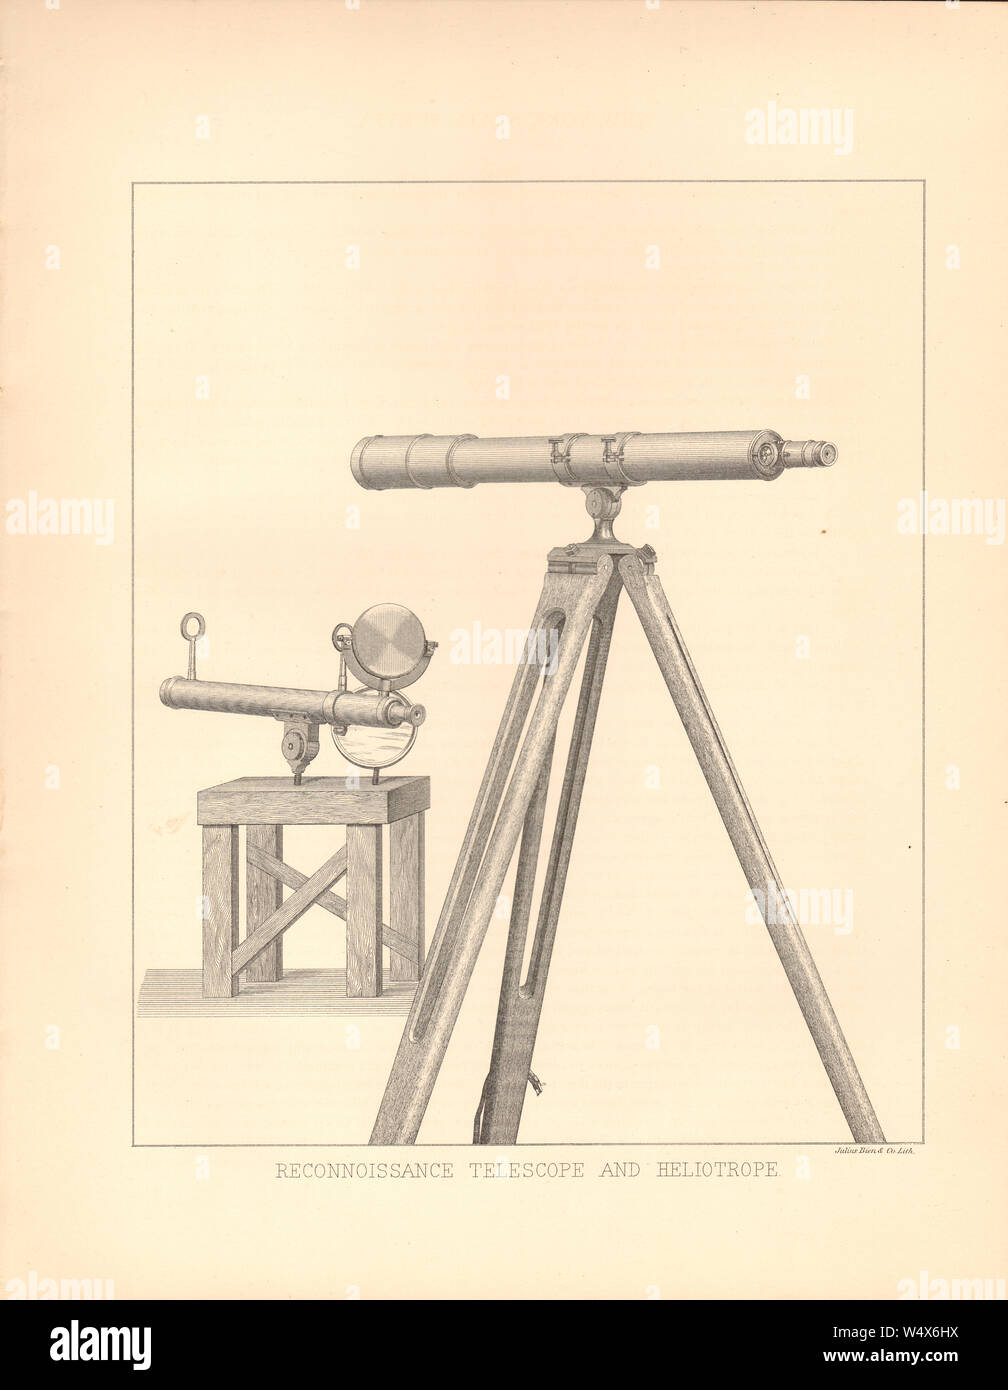 Reconnaissance Telescopes and Heliotrope - Antiquarian bookplate from a set of plates showing 19th century survey tools in a NY State Survey Report Stock Photo